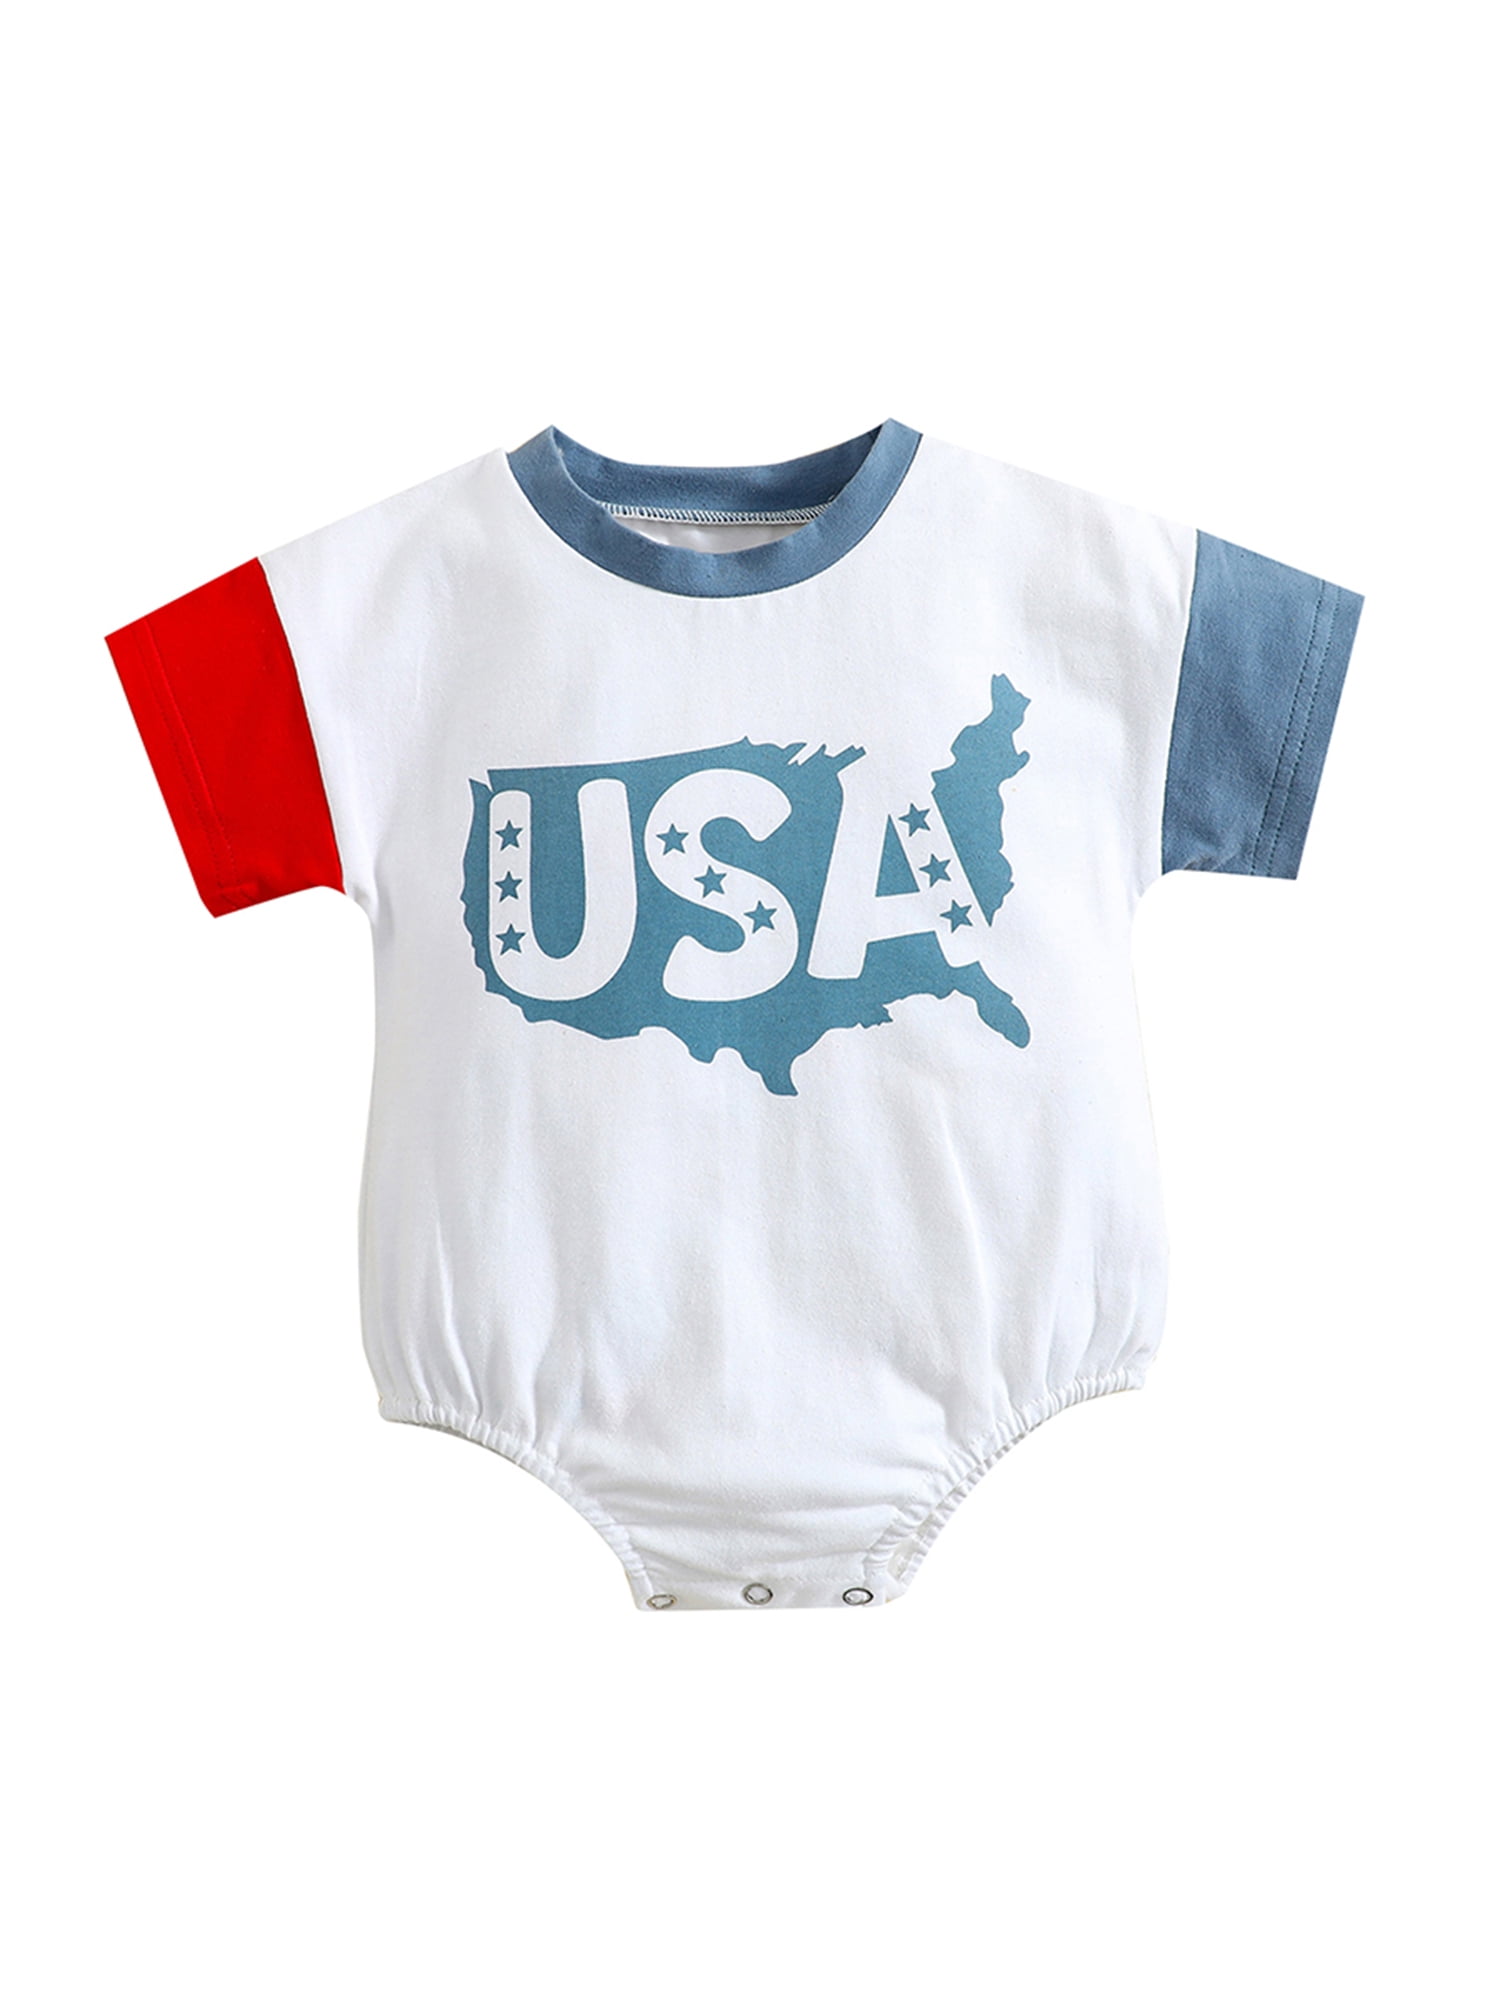 Newborn Infant Baby Boy Girl 4th Of July Romper Bodysuit Jumpsuit Outfit Clothes 